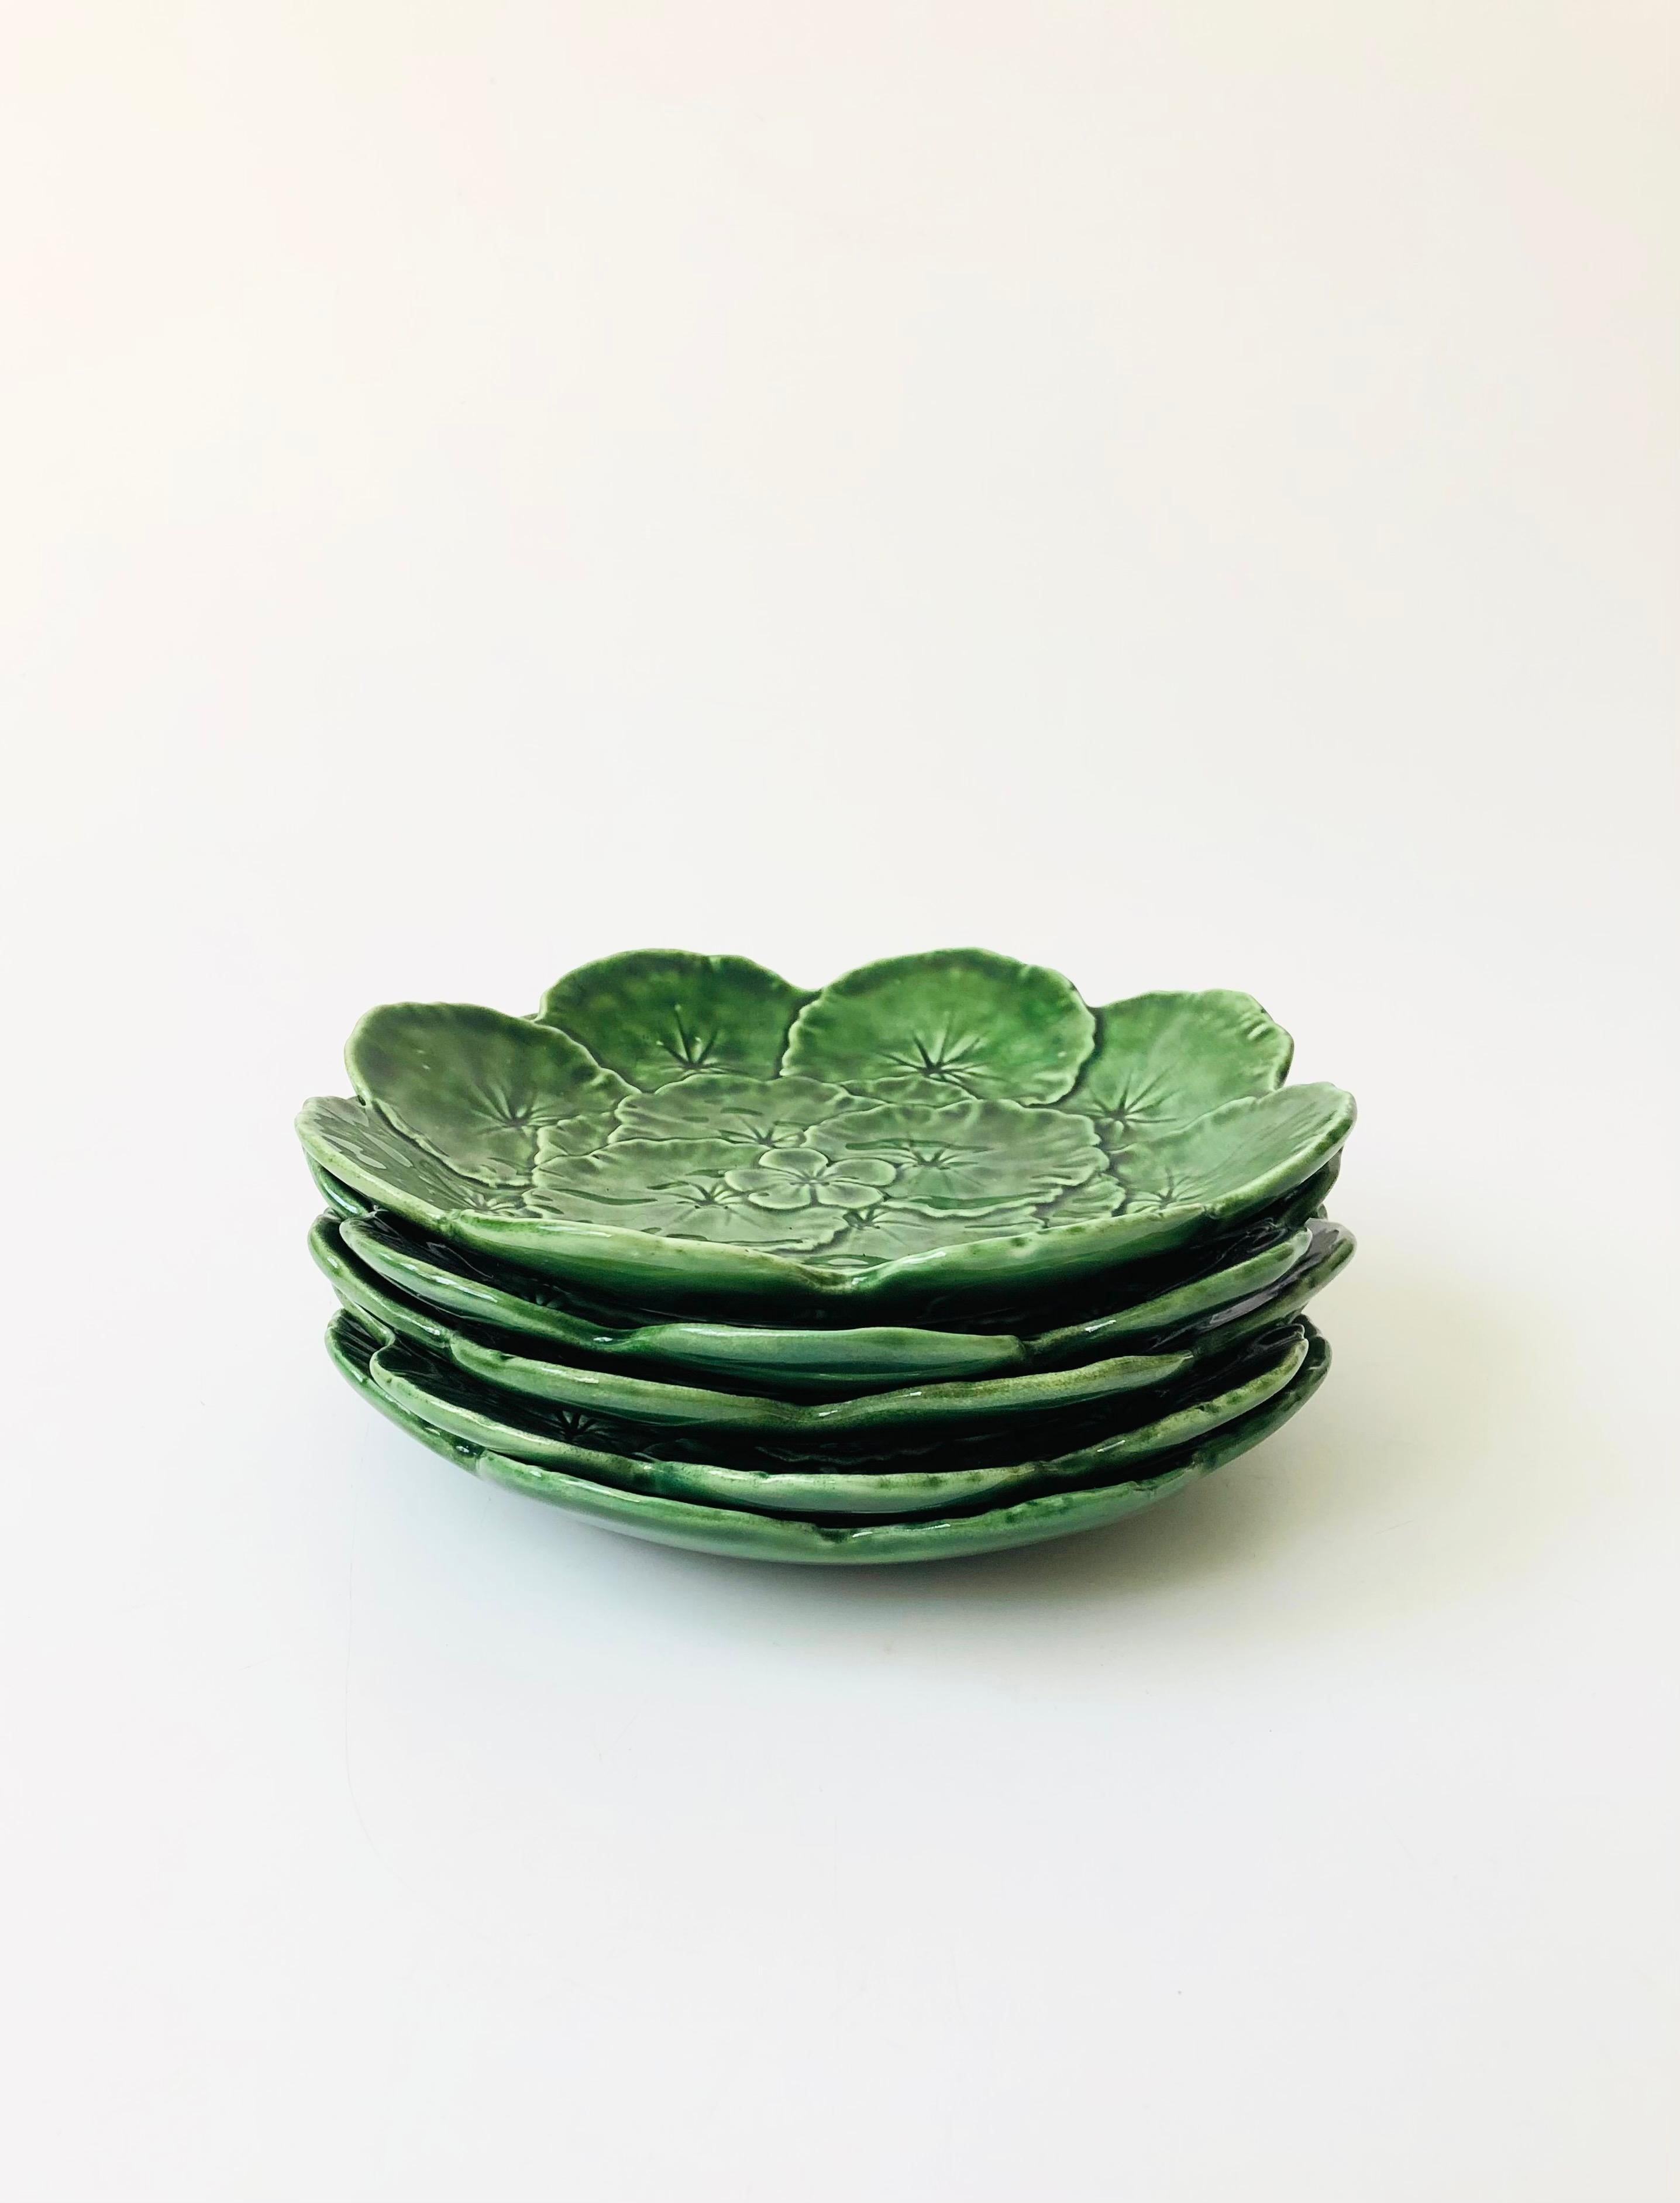 A set of 5 vintage cabbage ware saladplates. Beautiful detailing has been formed into the ceramic to create a design of layered leaves. Made in Portugal, marked on the base.